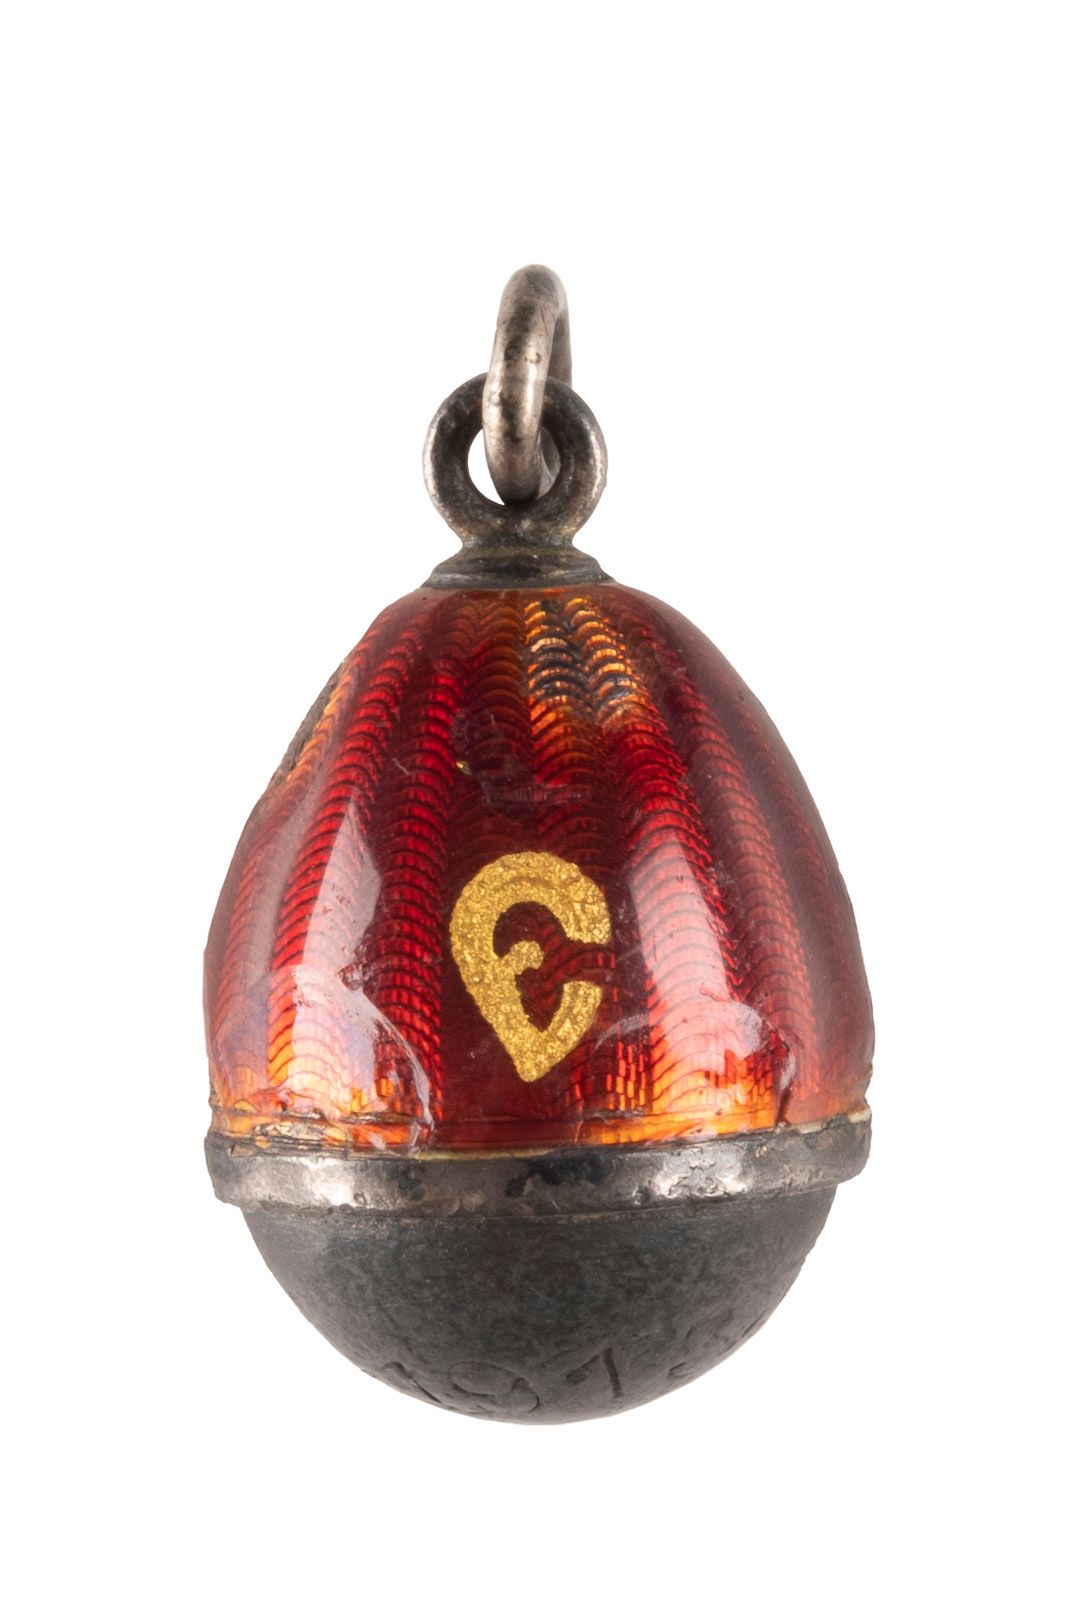 AN EGG PENDANT WITH A BULLET FROM THE WORLD WAR I 第一次世界大战中的子弹蛋挂件 俄罗斯，日期为1913年 子弹&hellip;